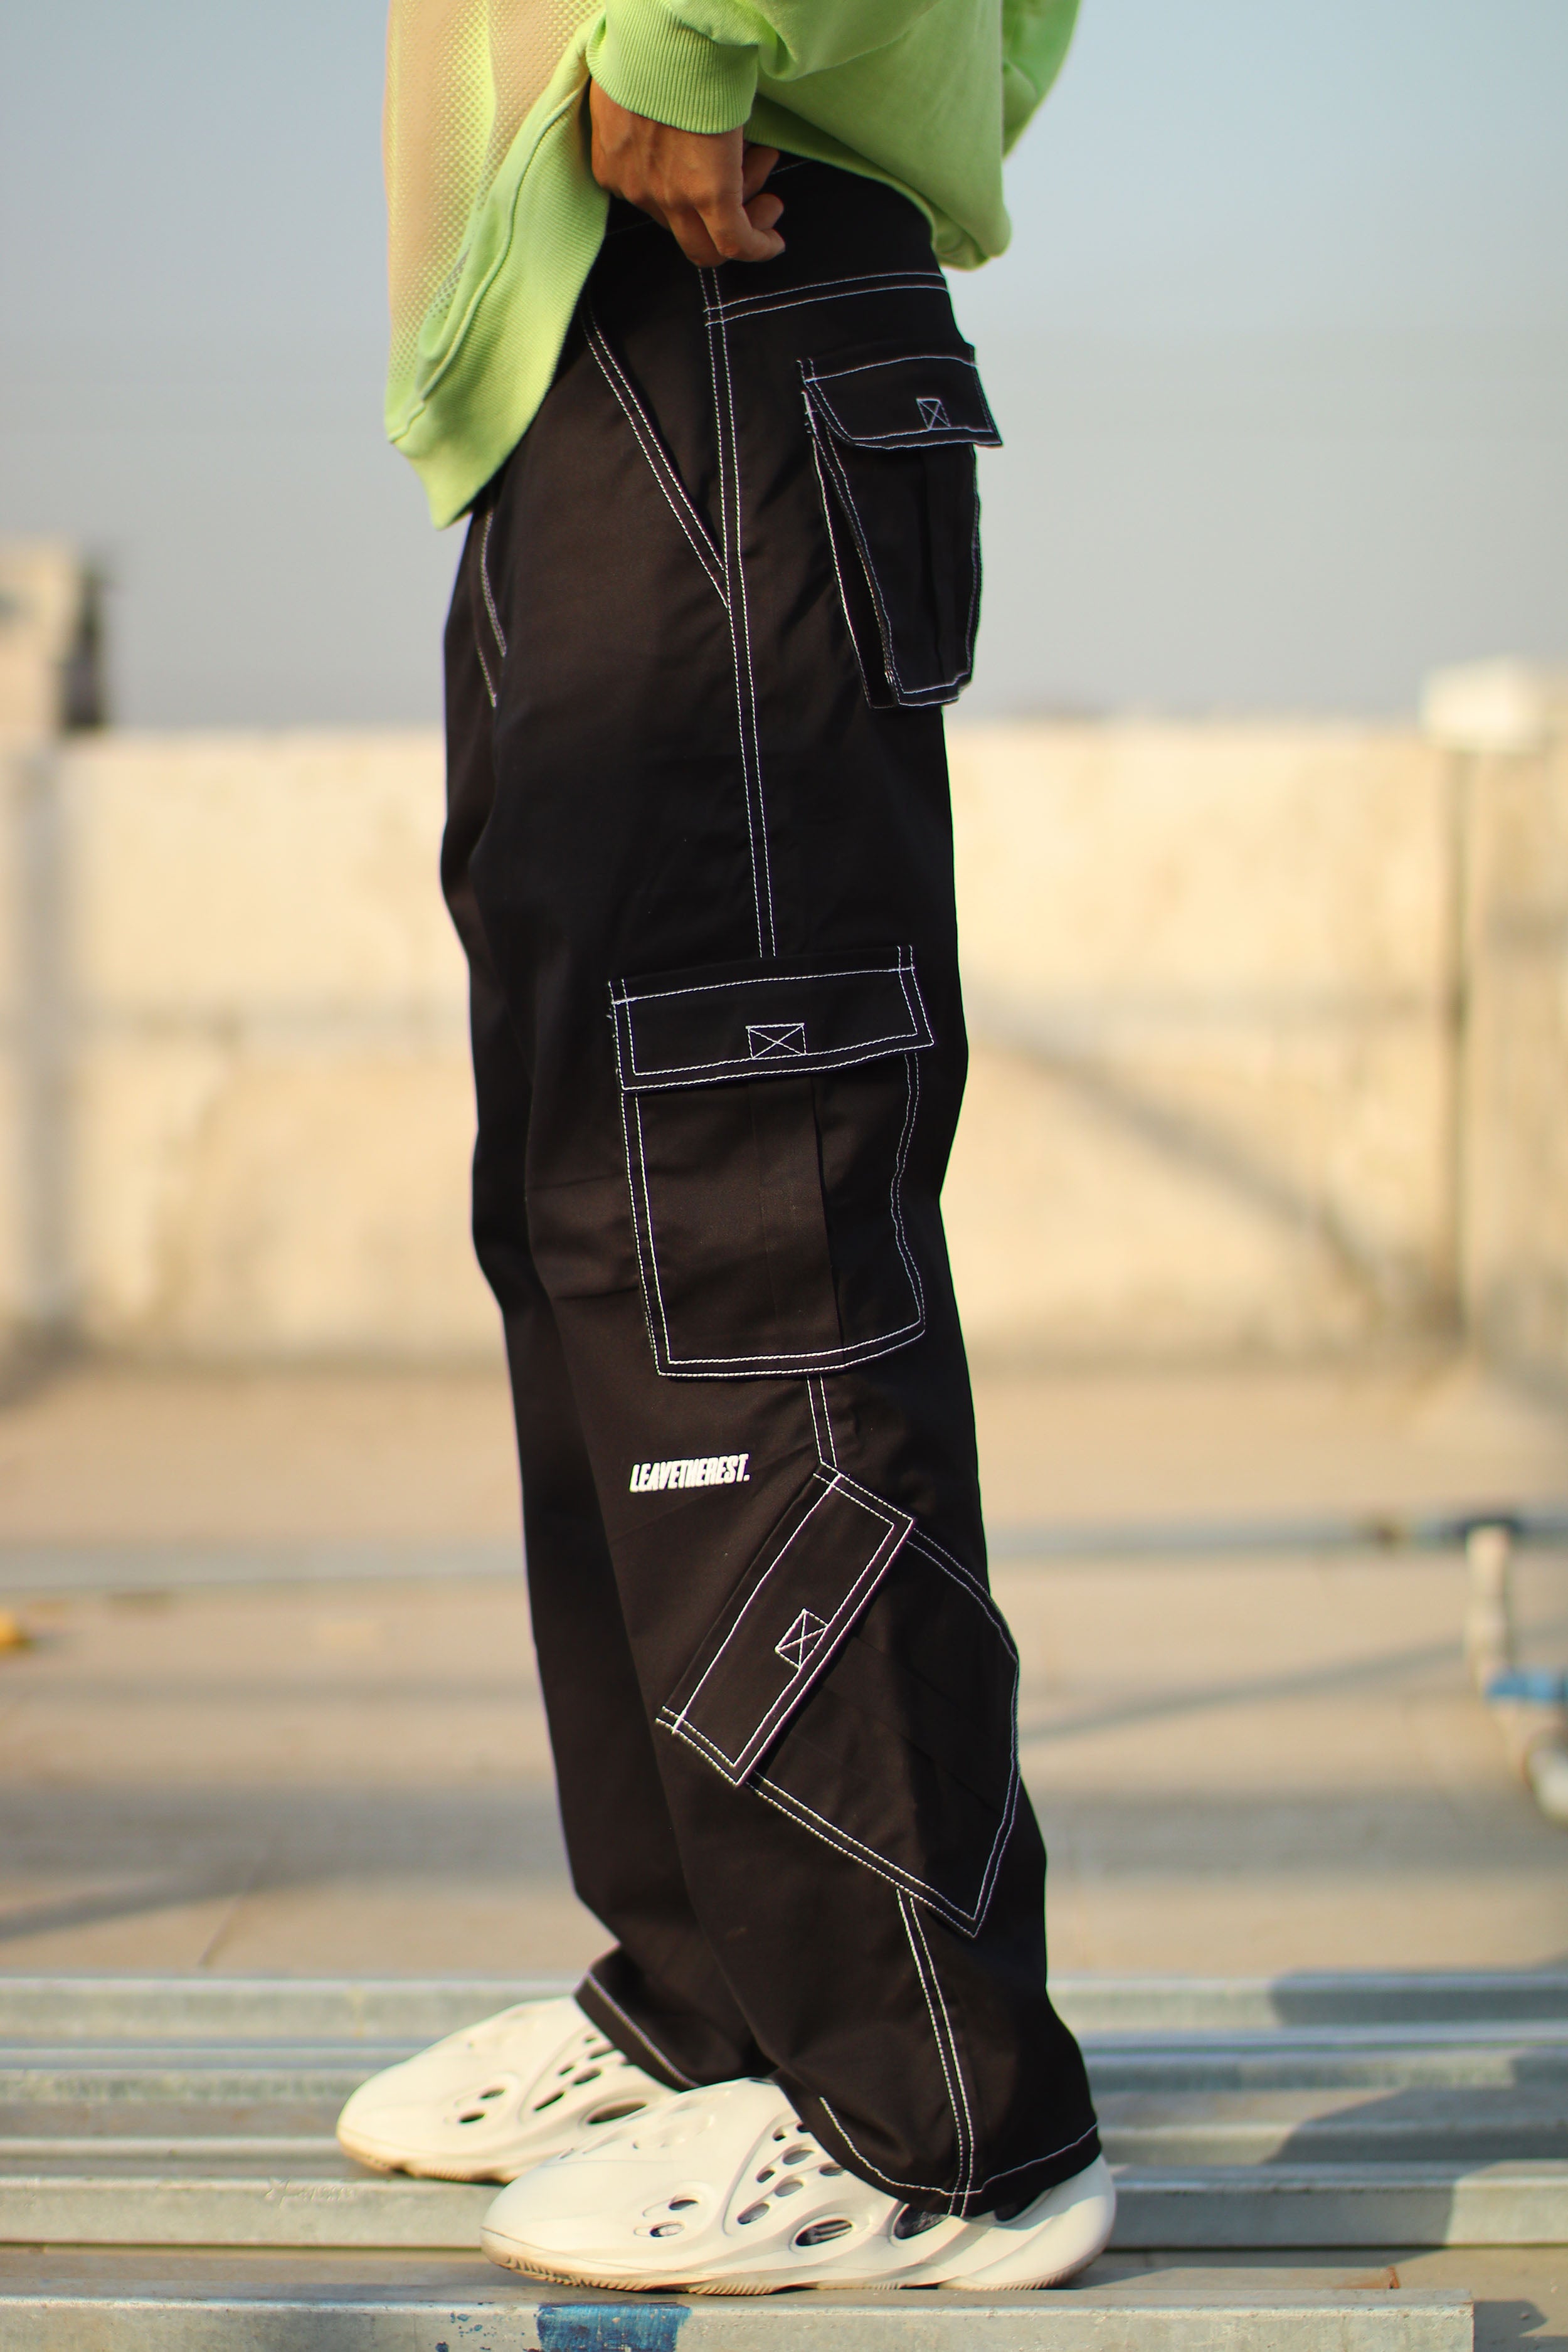 Details more than 78 eight pocket cargo pants latest - in.eteachers